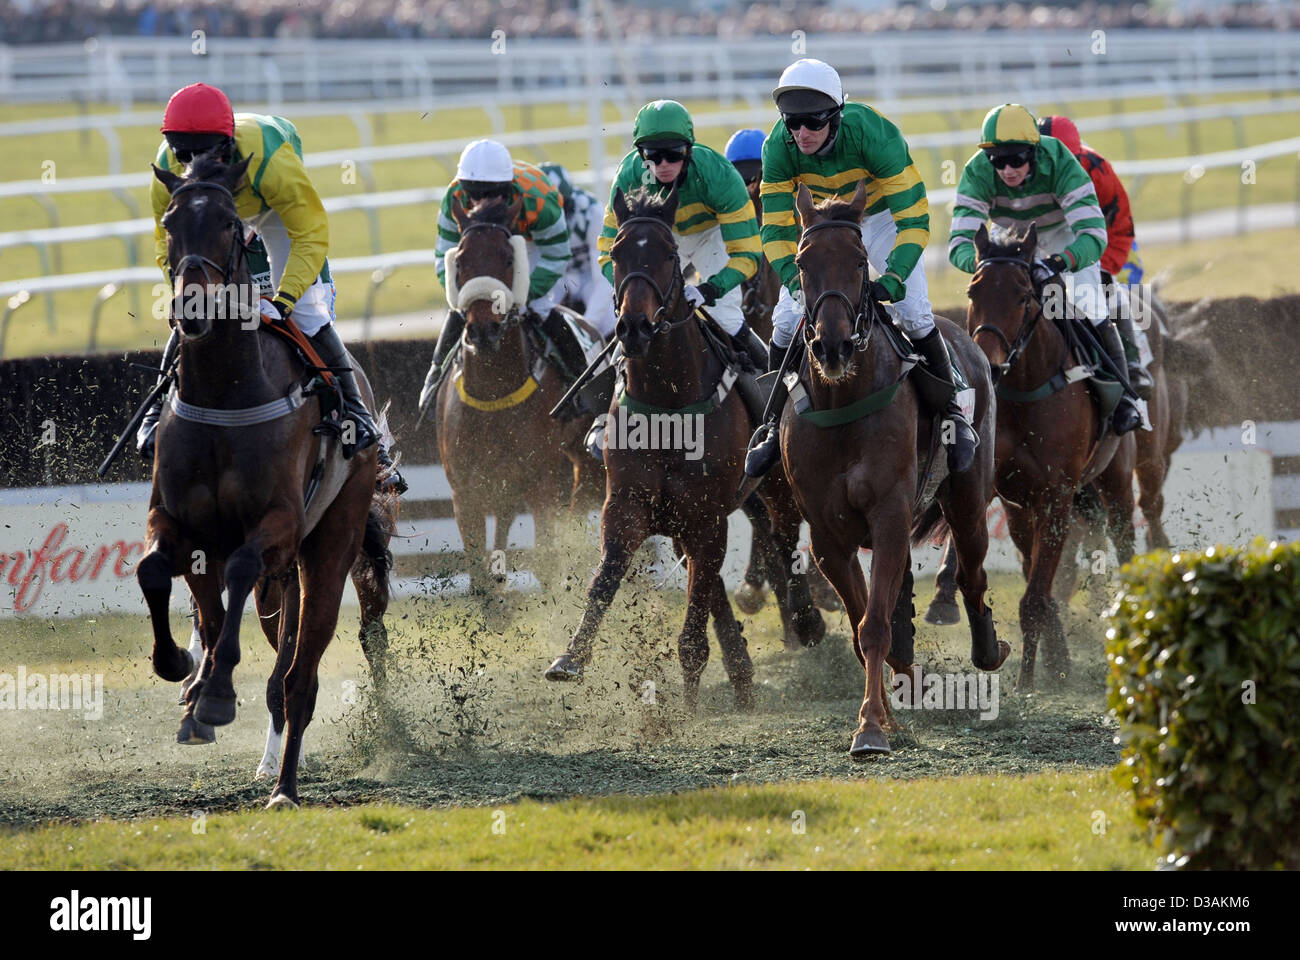 Jockeys ride their horses in front of the Grandstand during The Cheltenham Festival an annual horse racing event in England Stock Photo